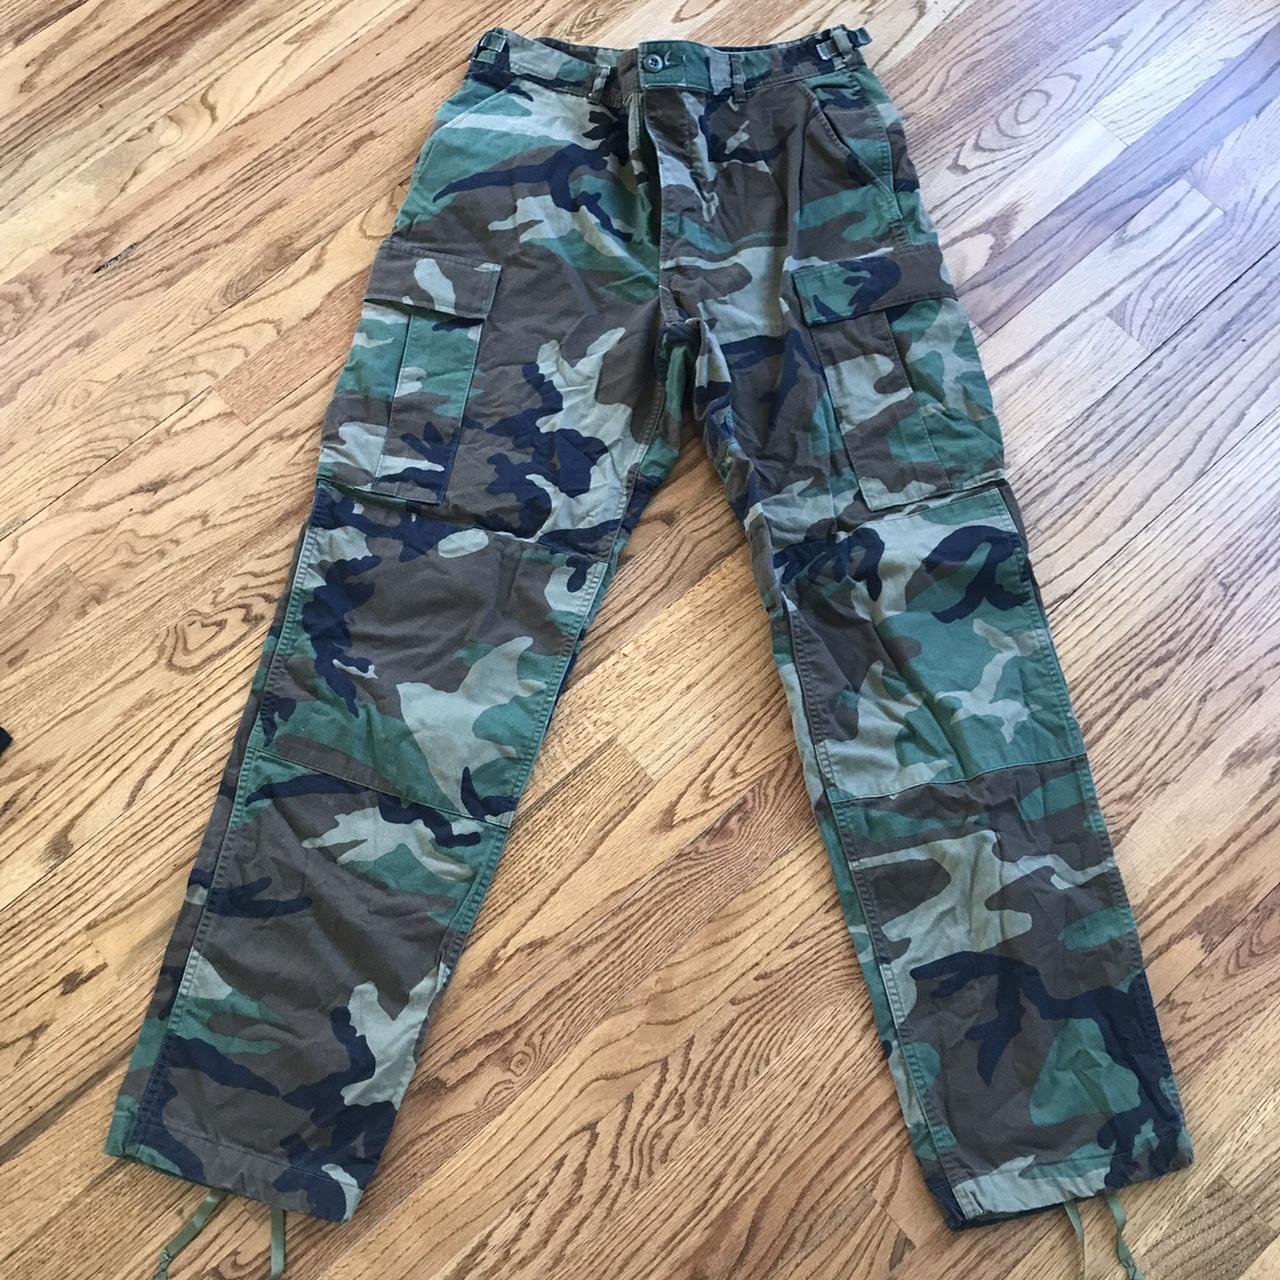 American Vintage Camouflage Cargo Pants for Men